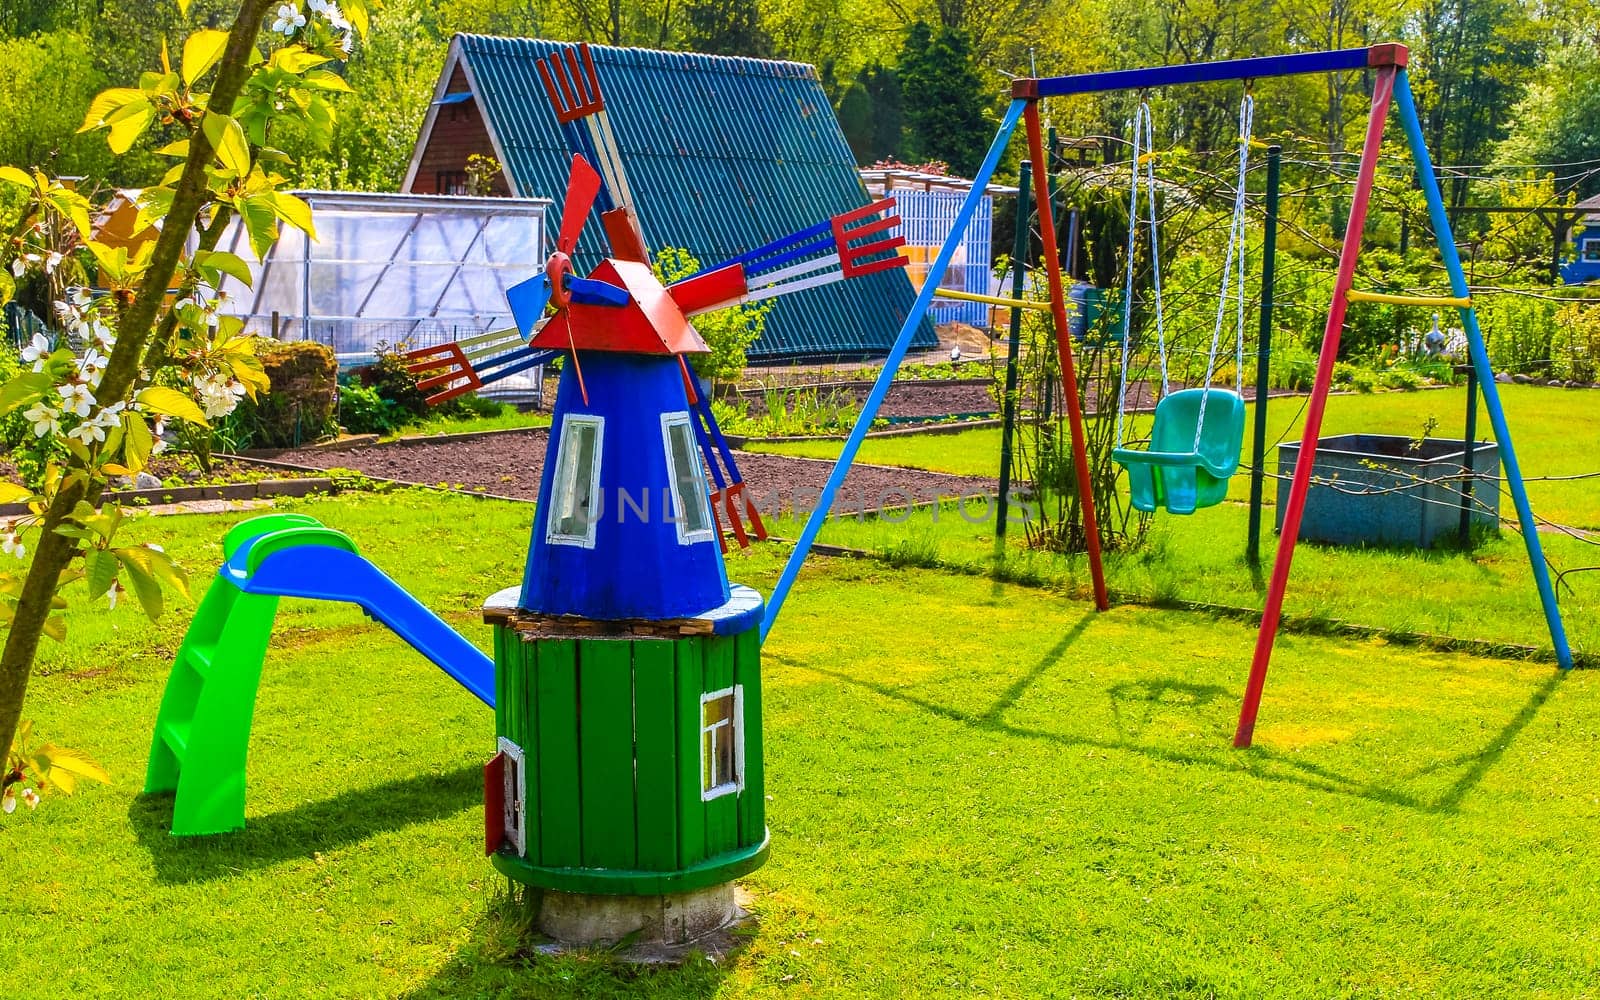 Small colorful playground in the garden in Germany. by Arkadij